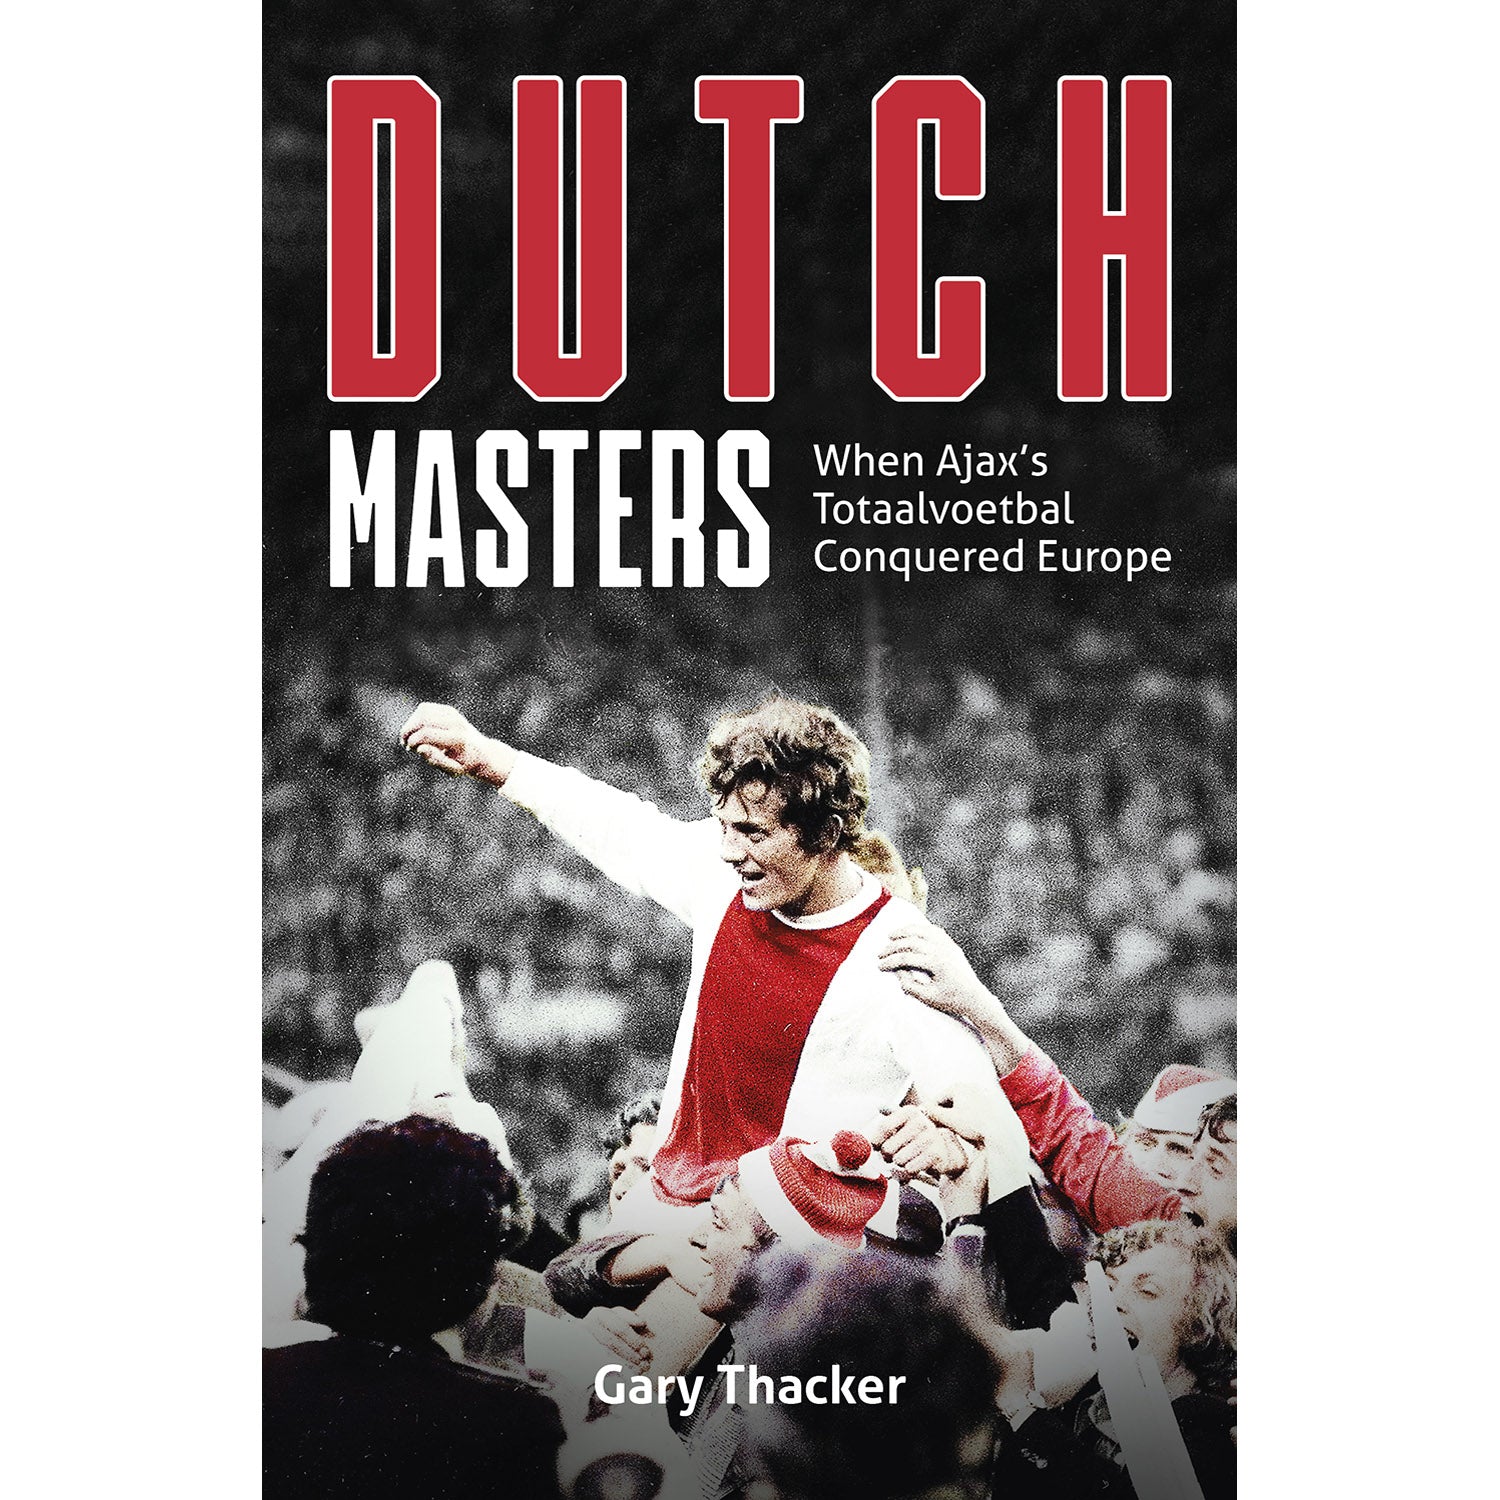 Dutch Masters – When Ajax's Totaalvoetbal Conquered Europe